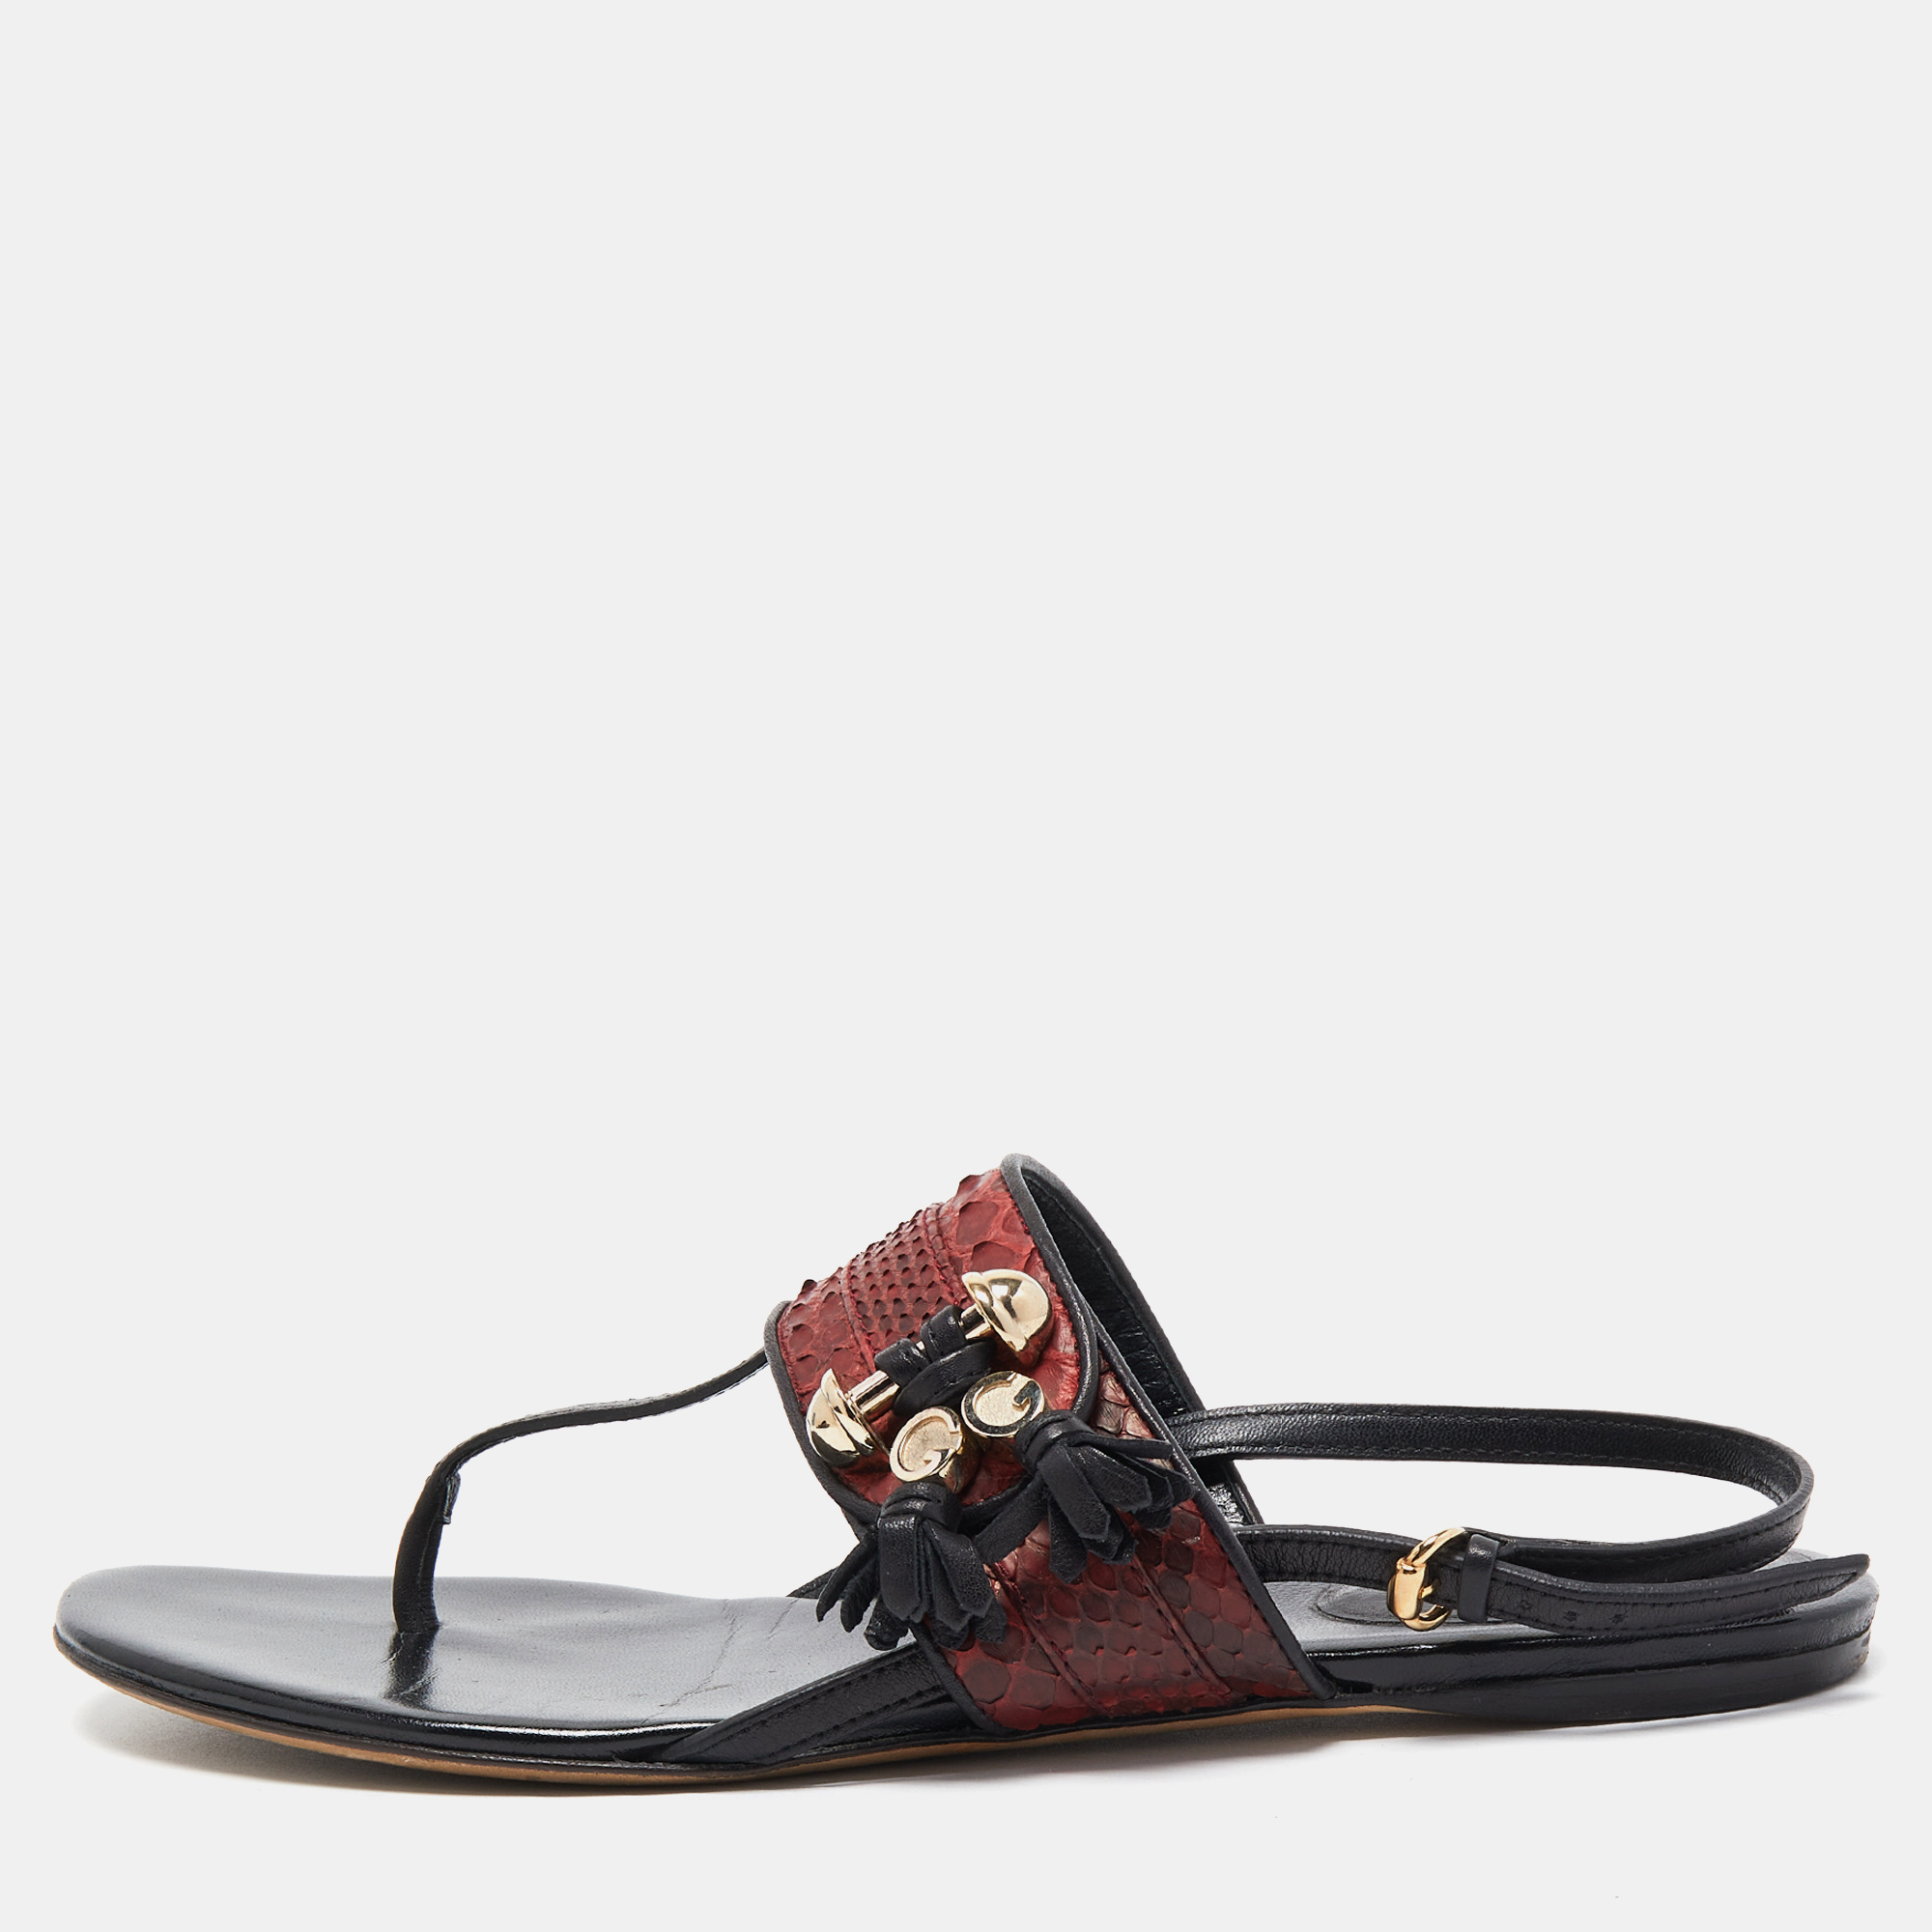 Gucci red/black python and leather thong flat sandals size 37